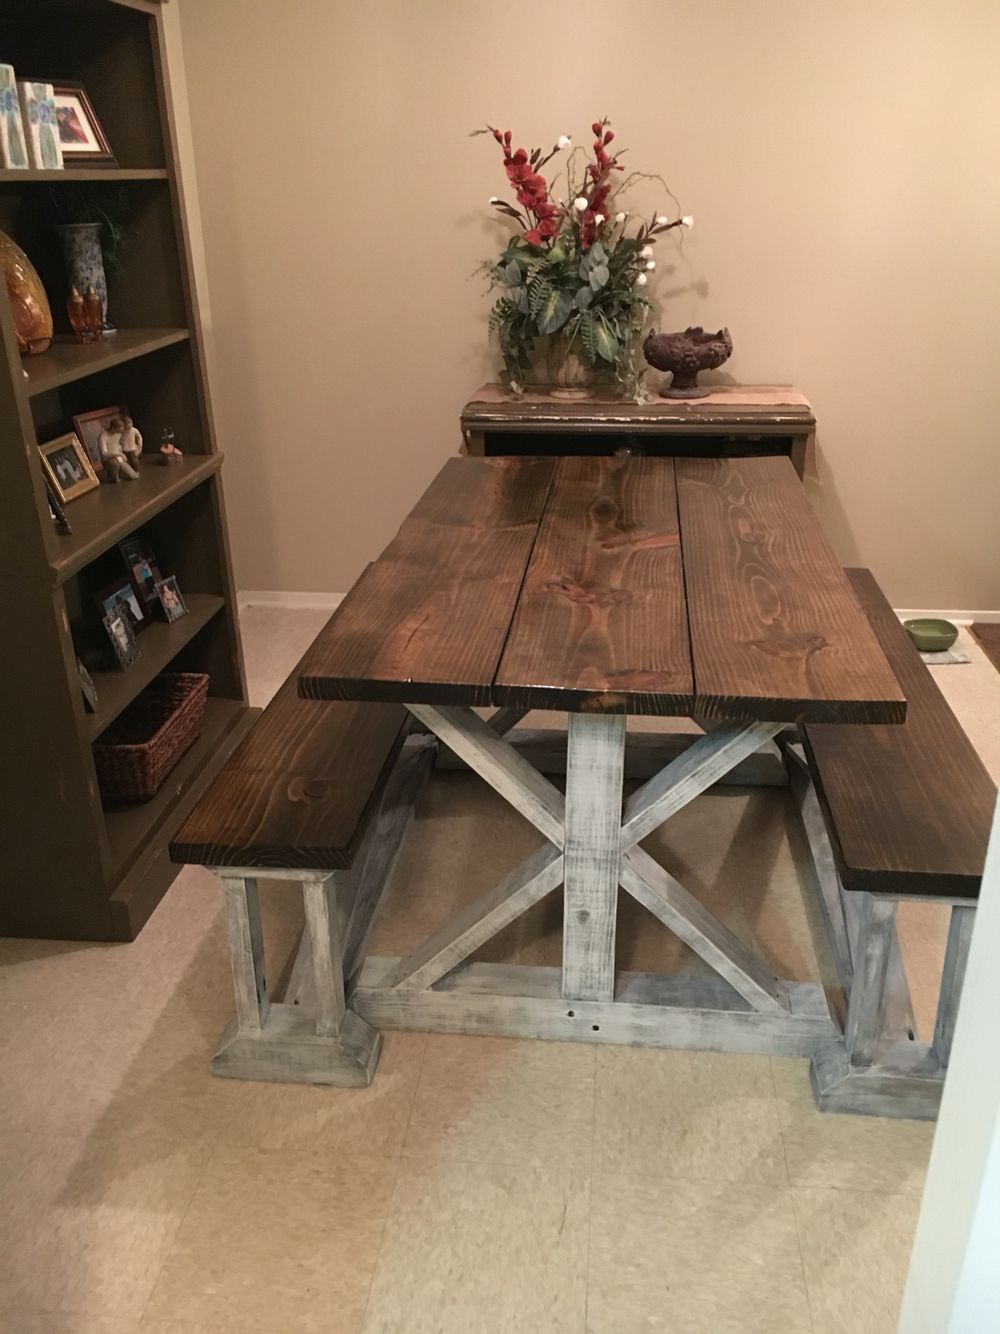 handmade farmhouse table with benches handmade furniture -  http://amzn.to/2iwpdj4 UPDBDWP